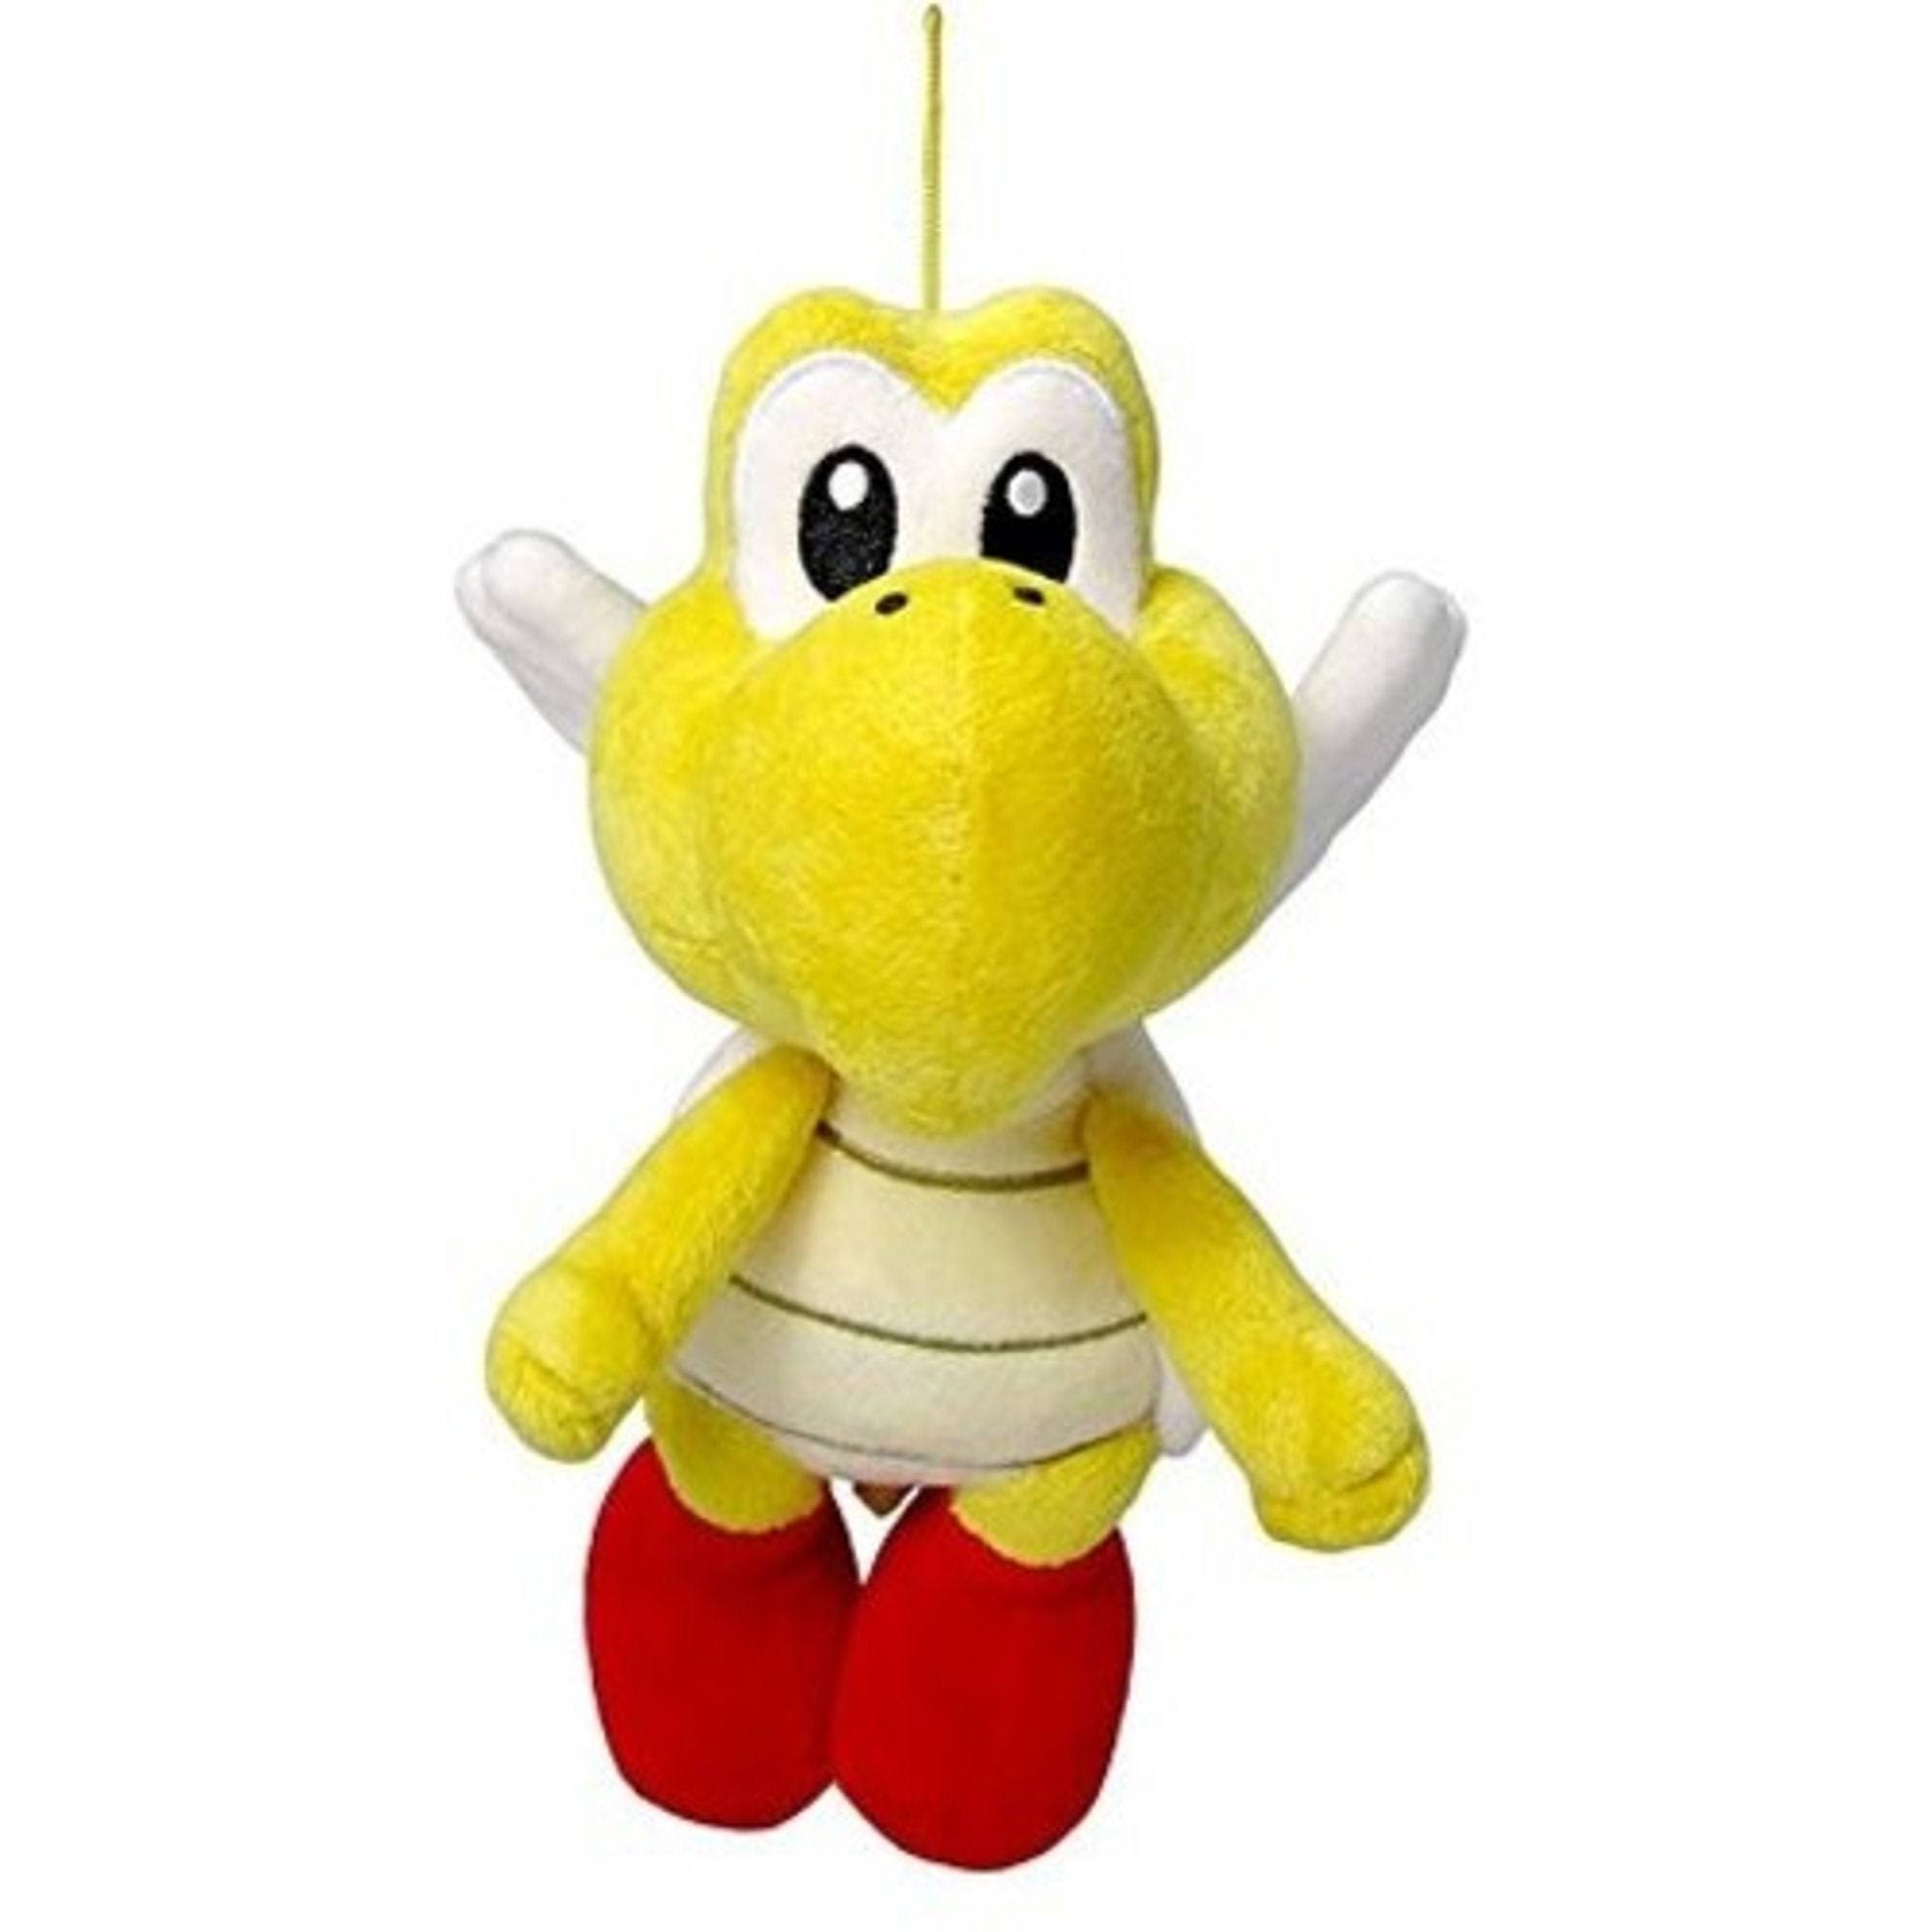 Little Buddy Super Mario All Star Collection Koopa Paratroopa Plush Doll